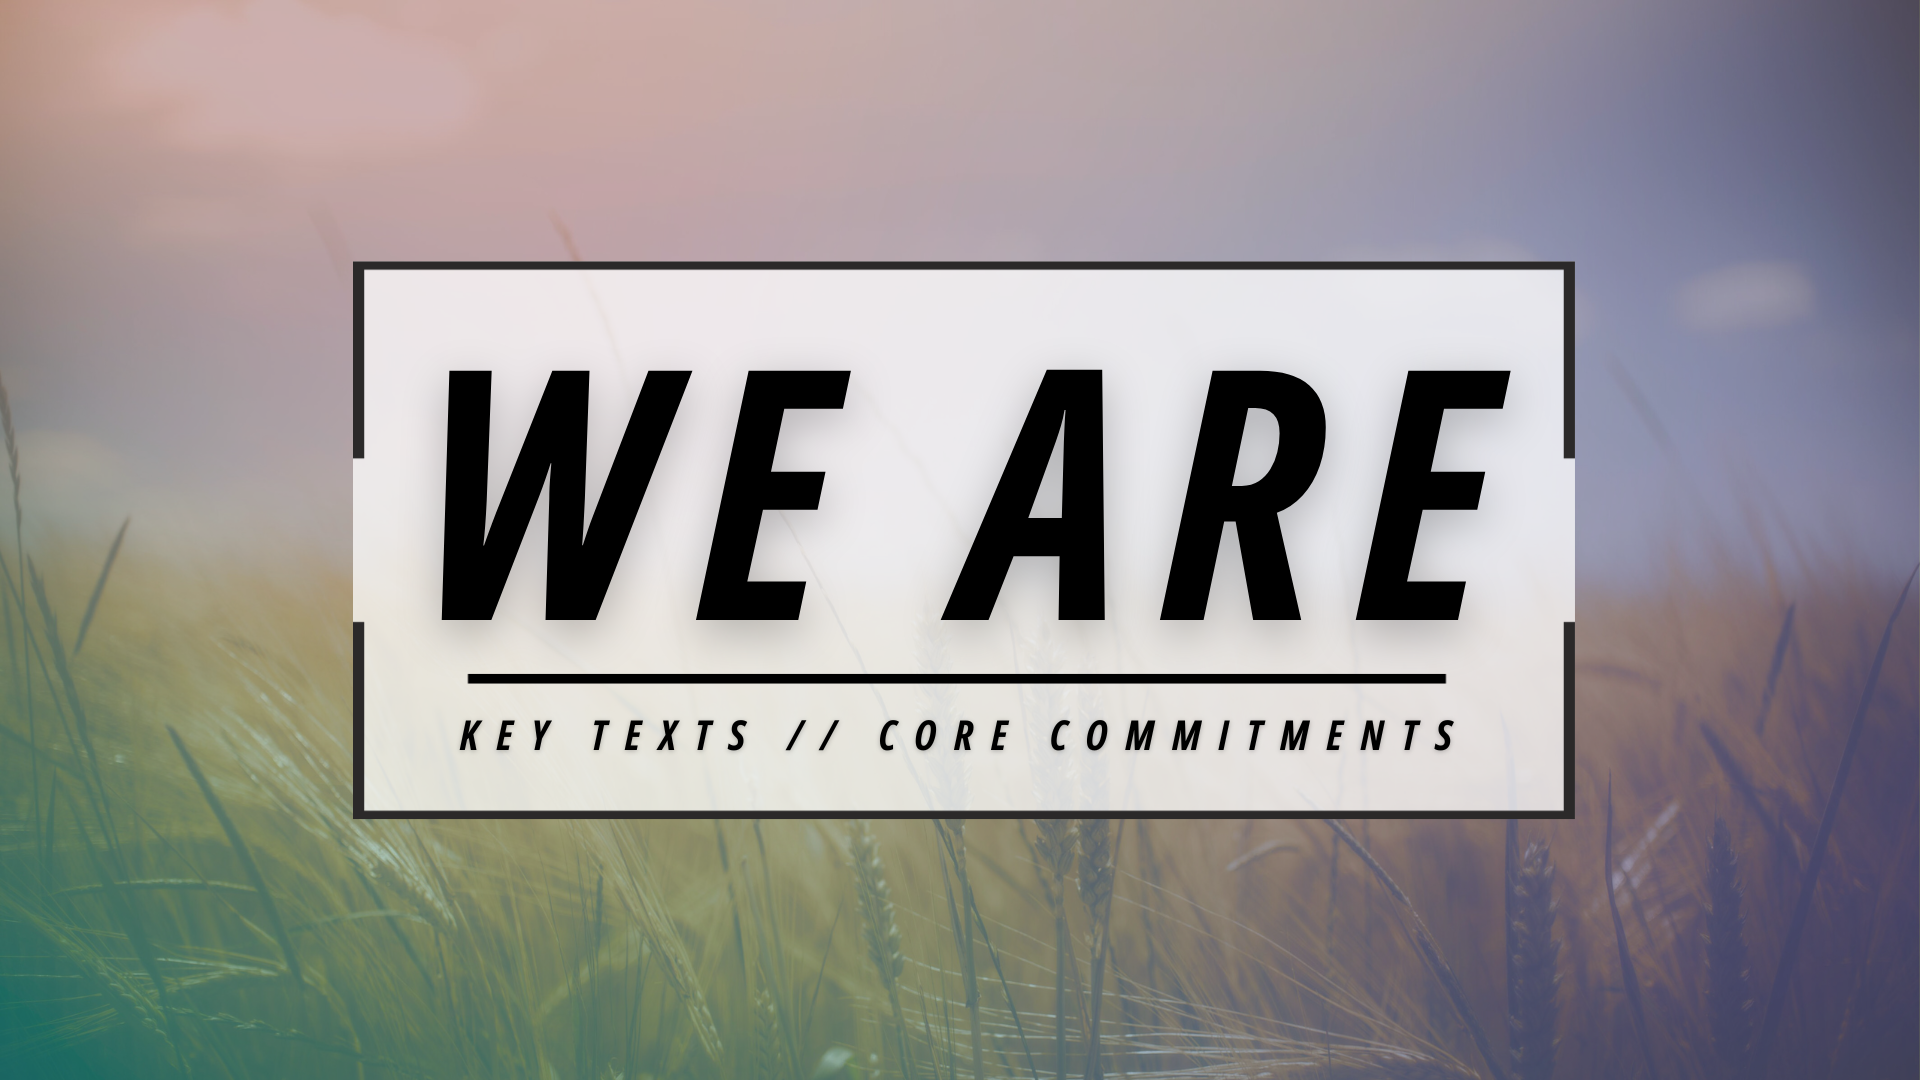 We Are: All About The Great Commandments